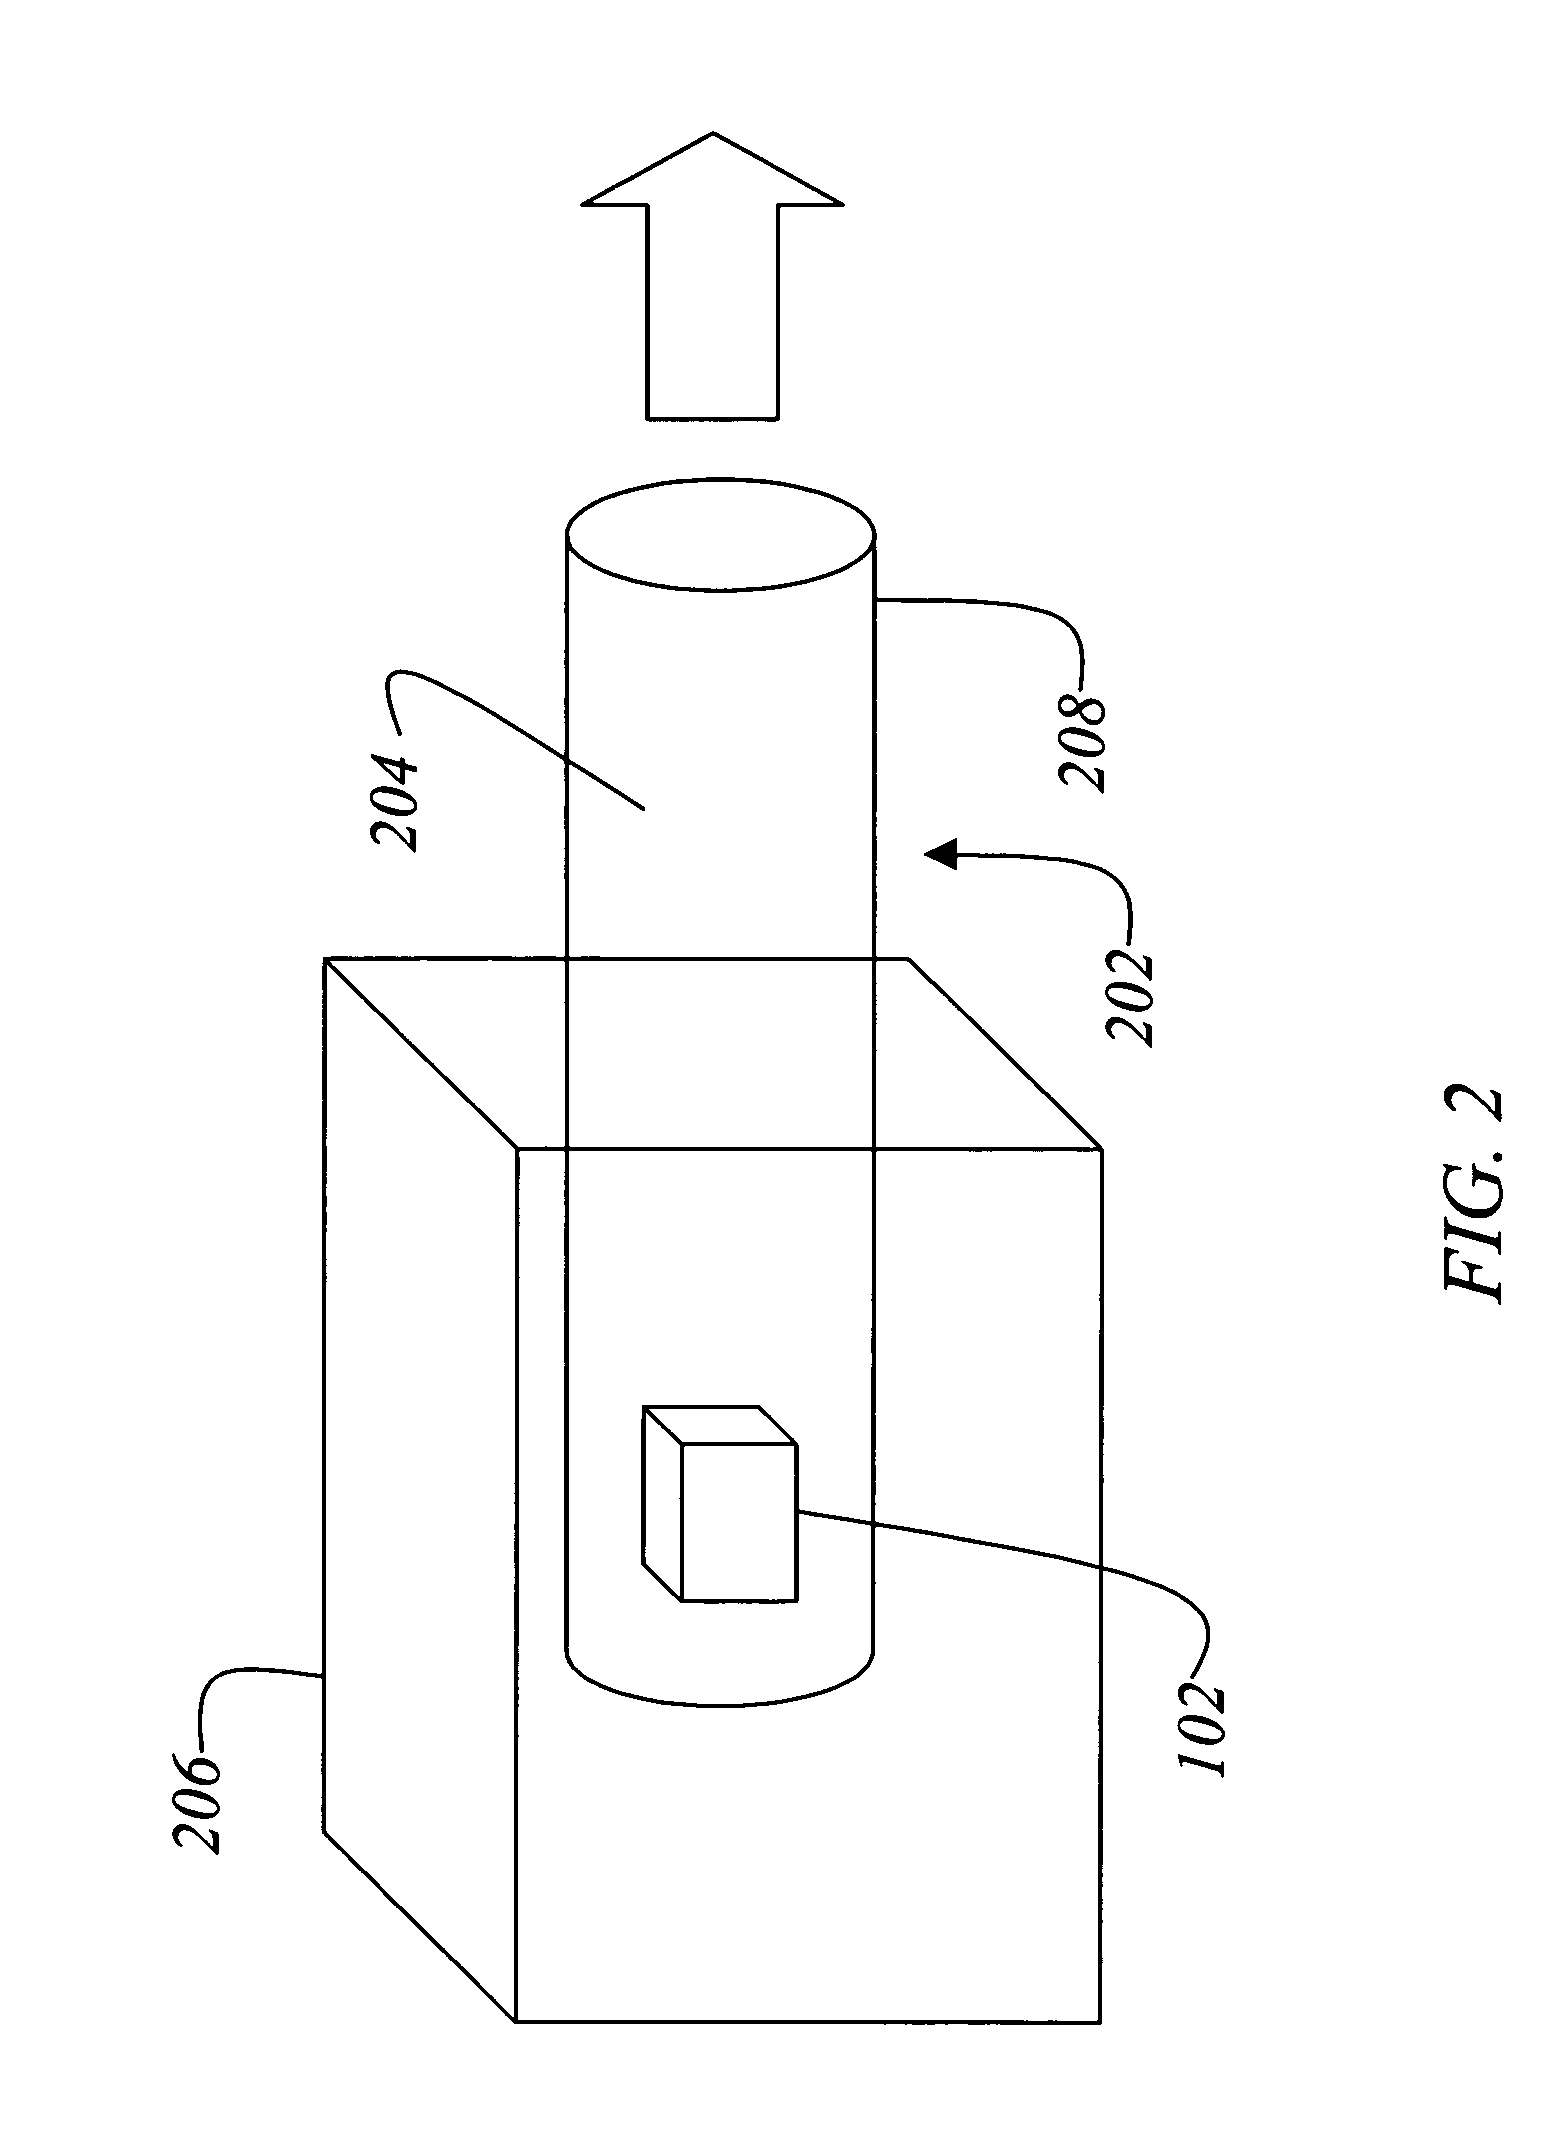 Method of suppressing sublimation in advanced thermoelectric devices